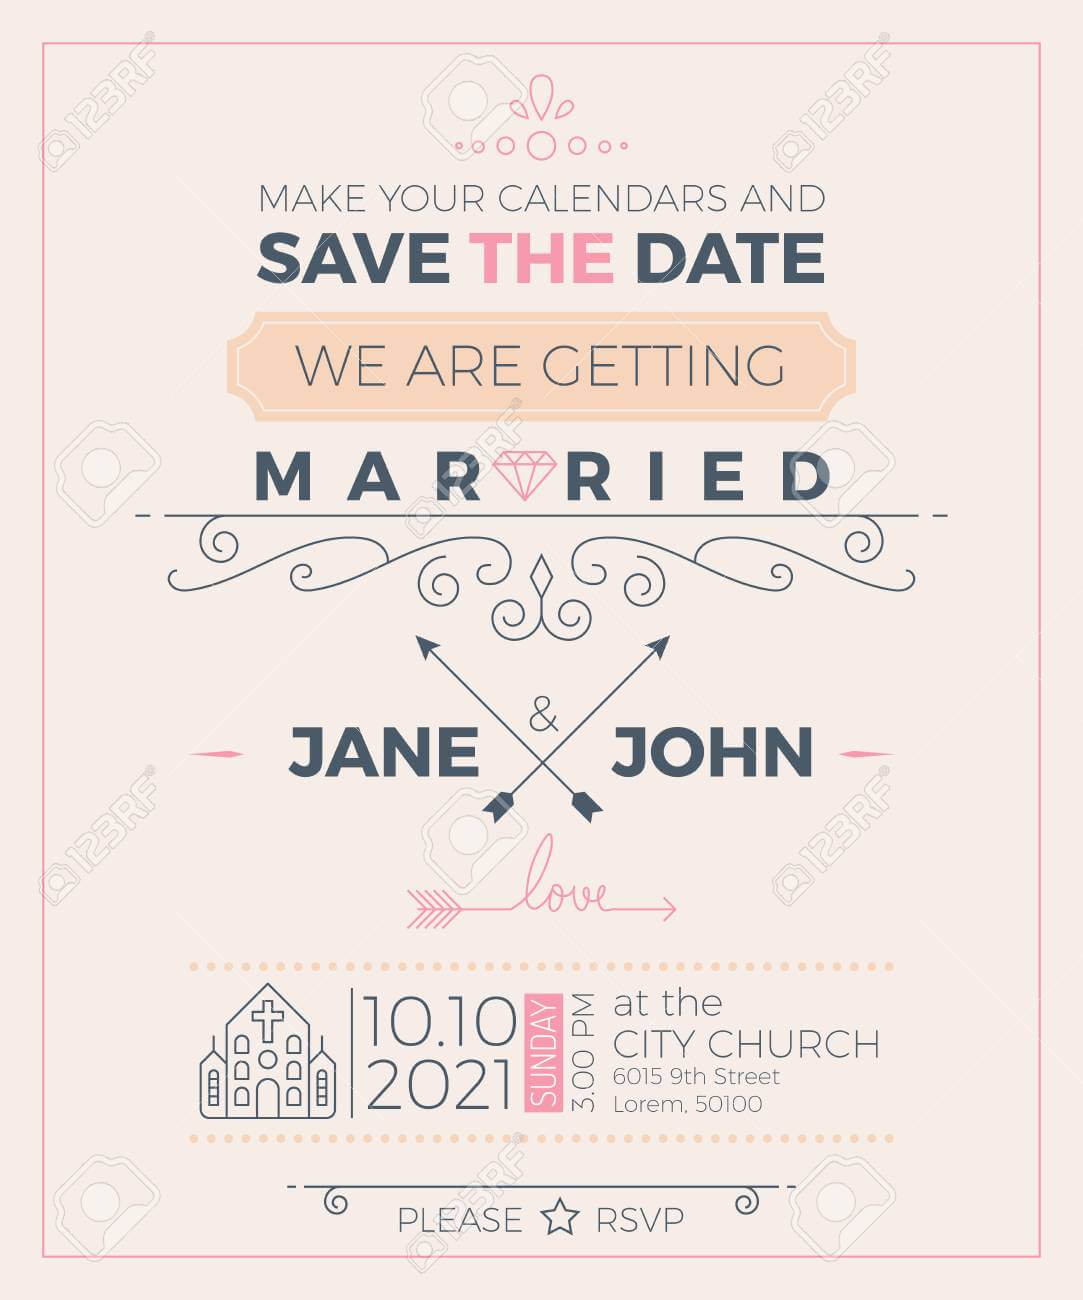 Vintage Wedding Invitation Card Template With Clean & Simple.. Regarding Church Invite Cards Template